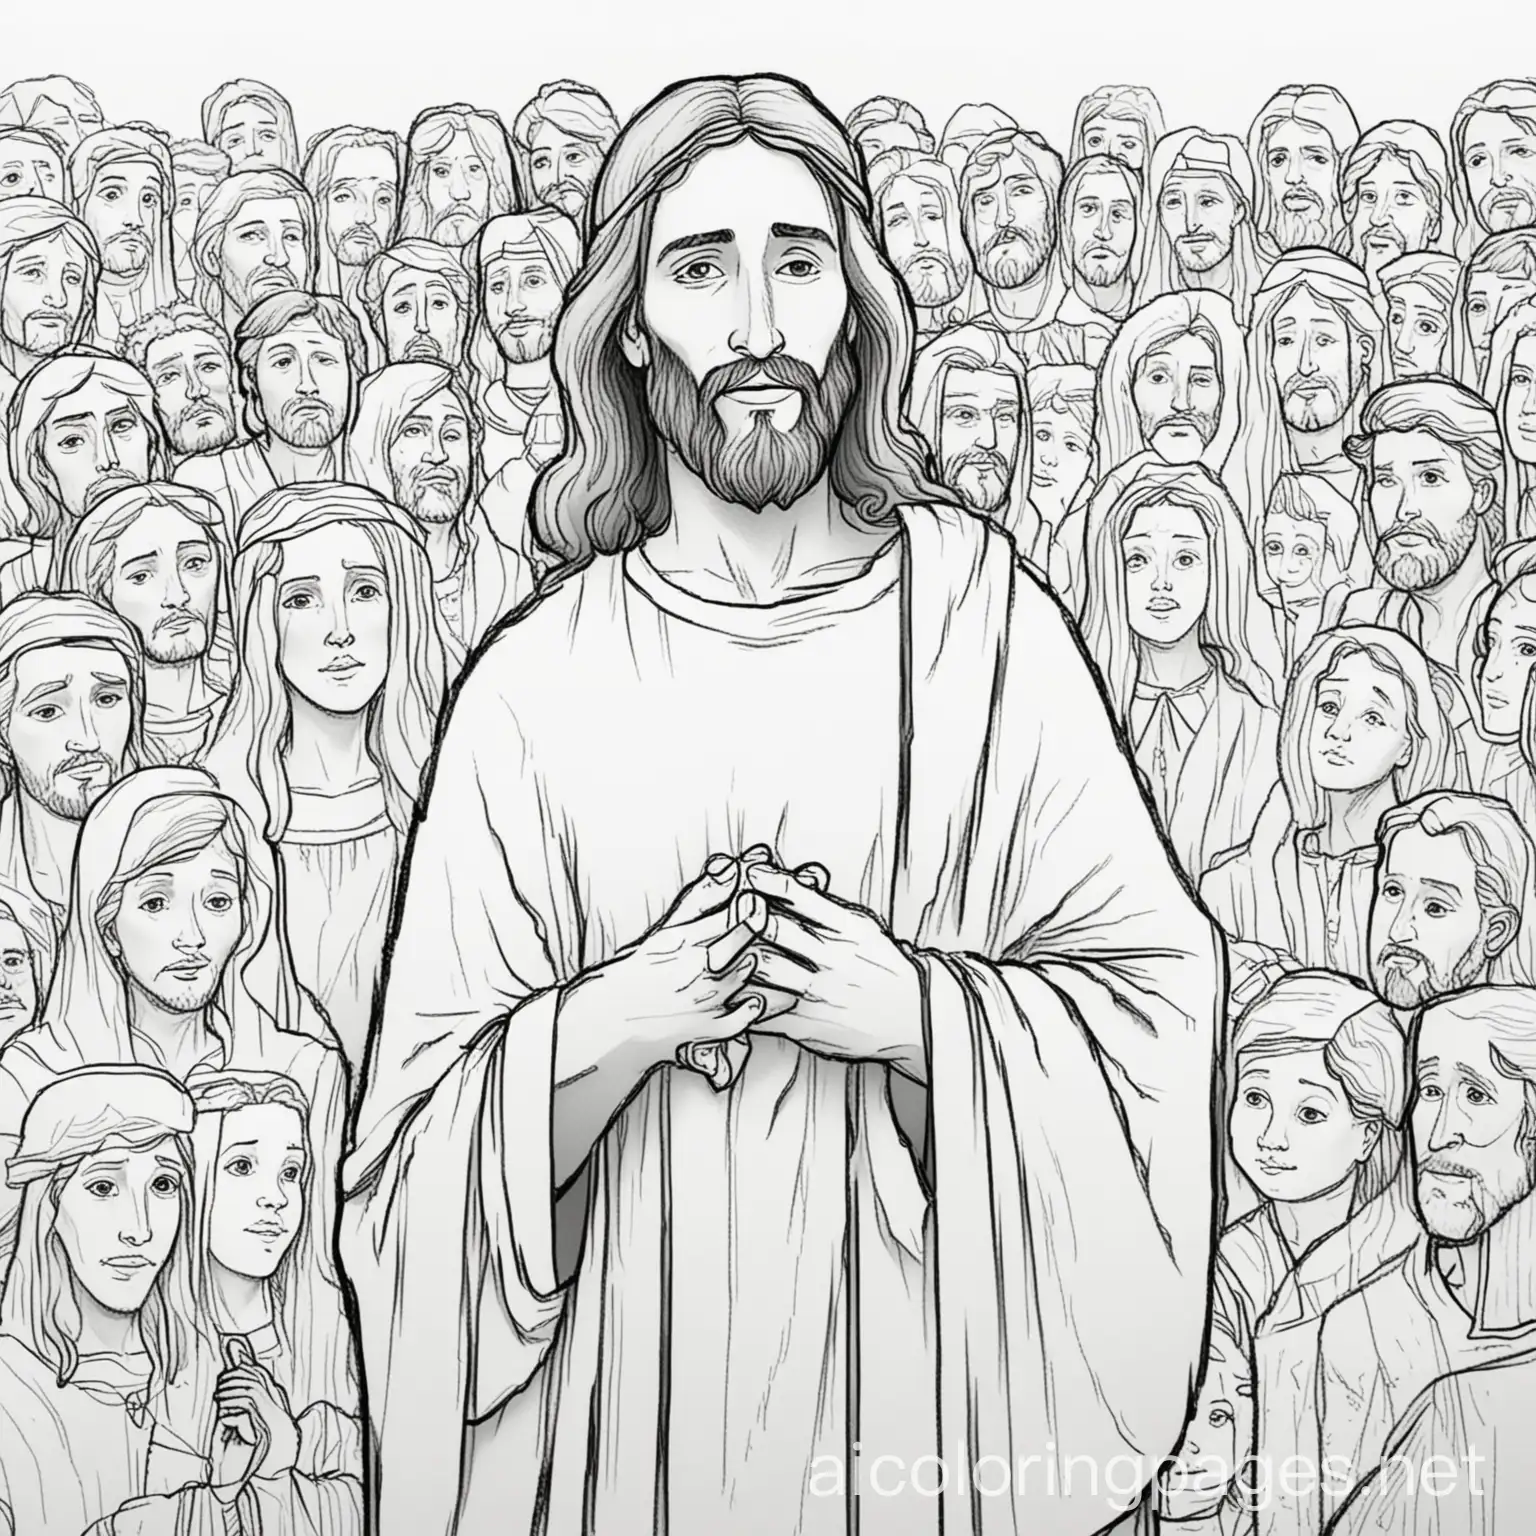 Jesus christ among the people, Coloring Page, black and white, line art, white background, Simplicity, Ample White Space. The background of the coloring page is plain white to make it easy for young children to color within the lines. The outlines of all the subjects are easy to distinguish, making it simple for kids to color without too much difficulty